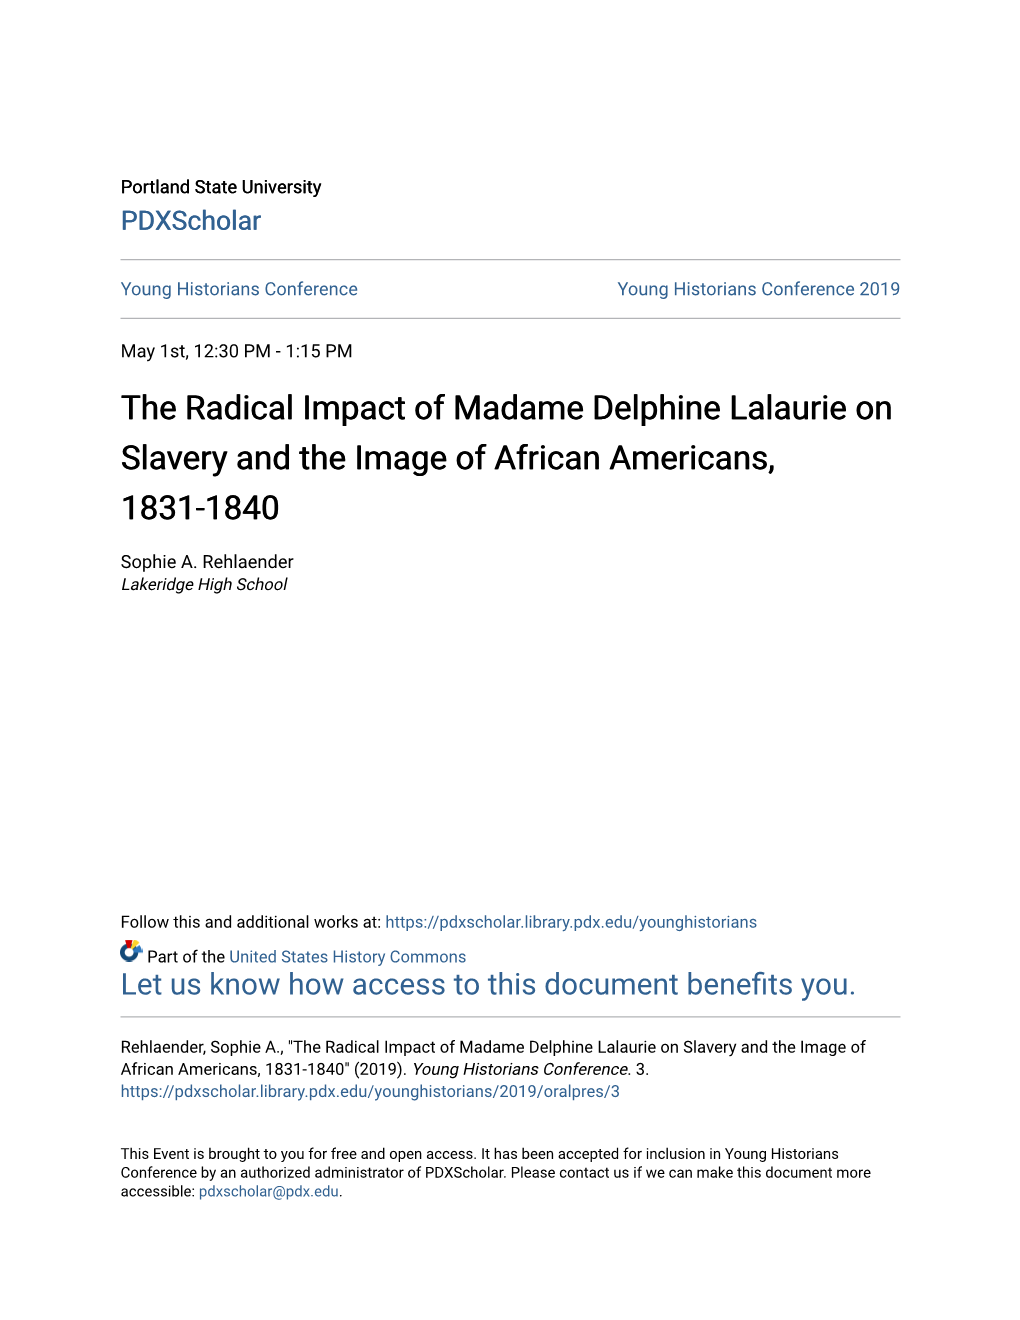 The Radical Impact of Madame Delphine Lalaurie on Slavery and the Image of African Americans, 1831-1840